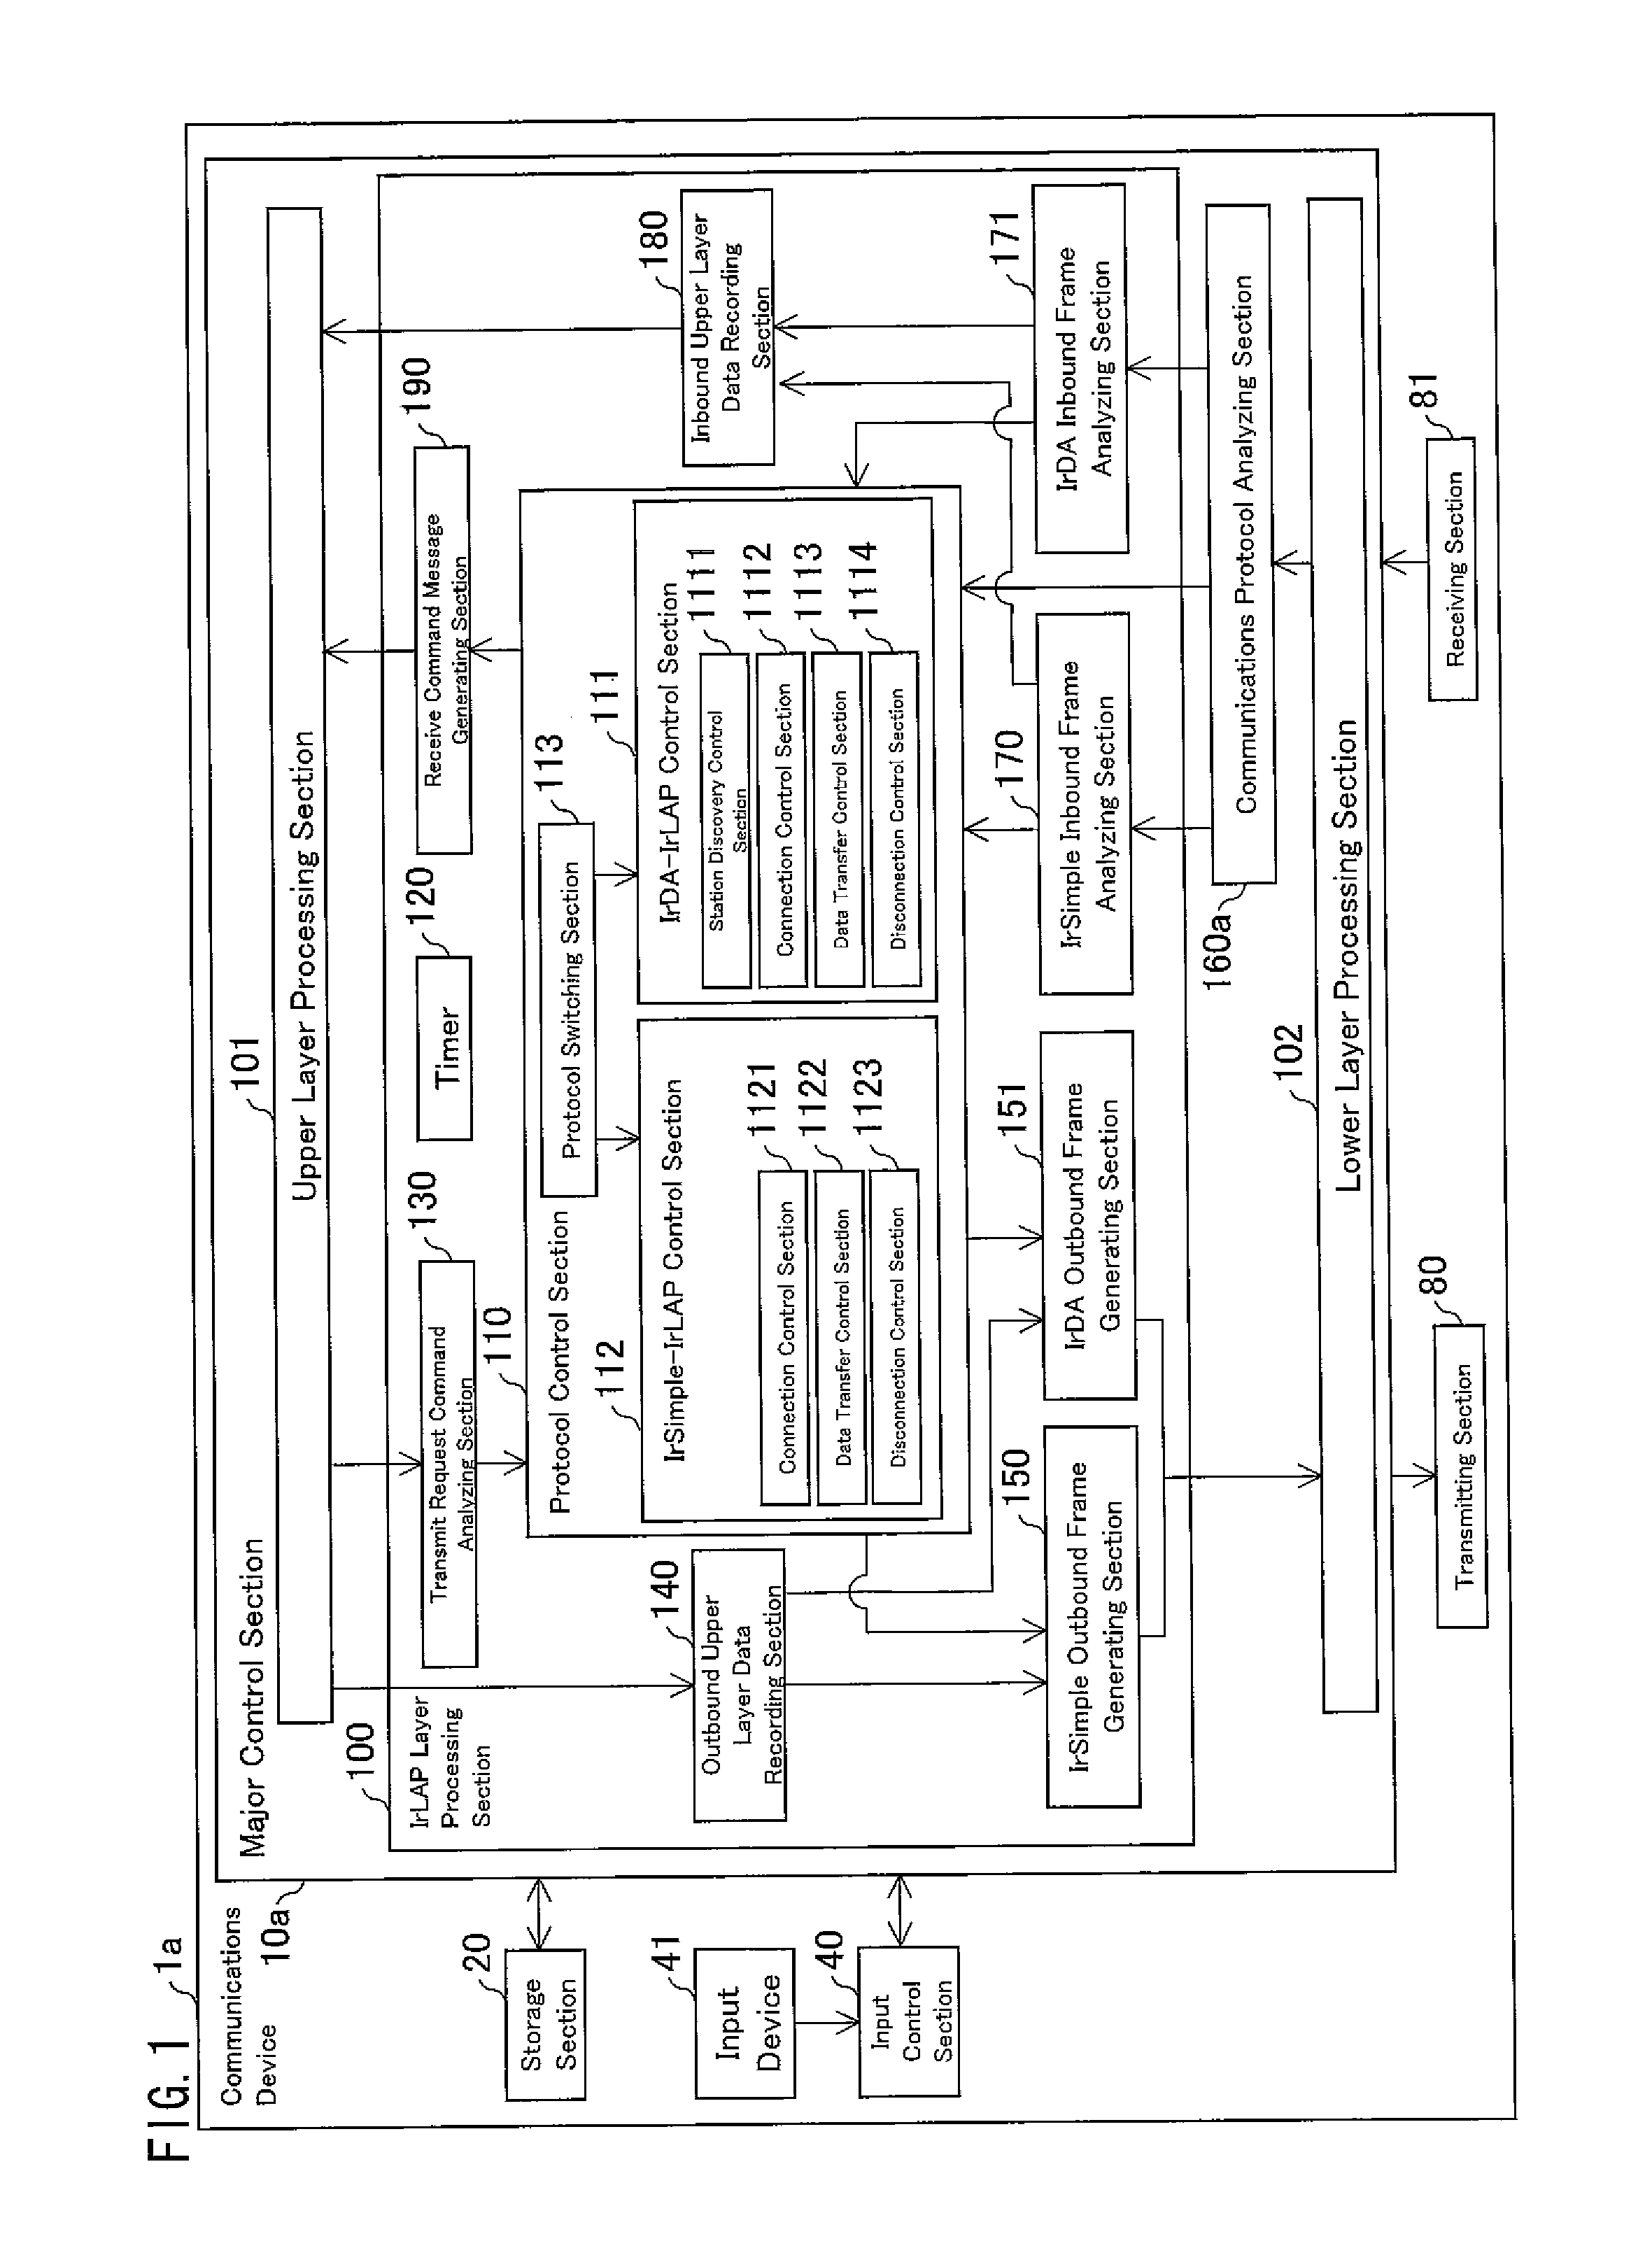 Communications device, communications method, communications circuit, communications system, computer program, and computer-readable storage medium containing the computer program